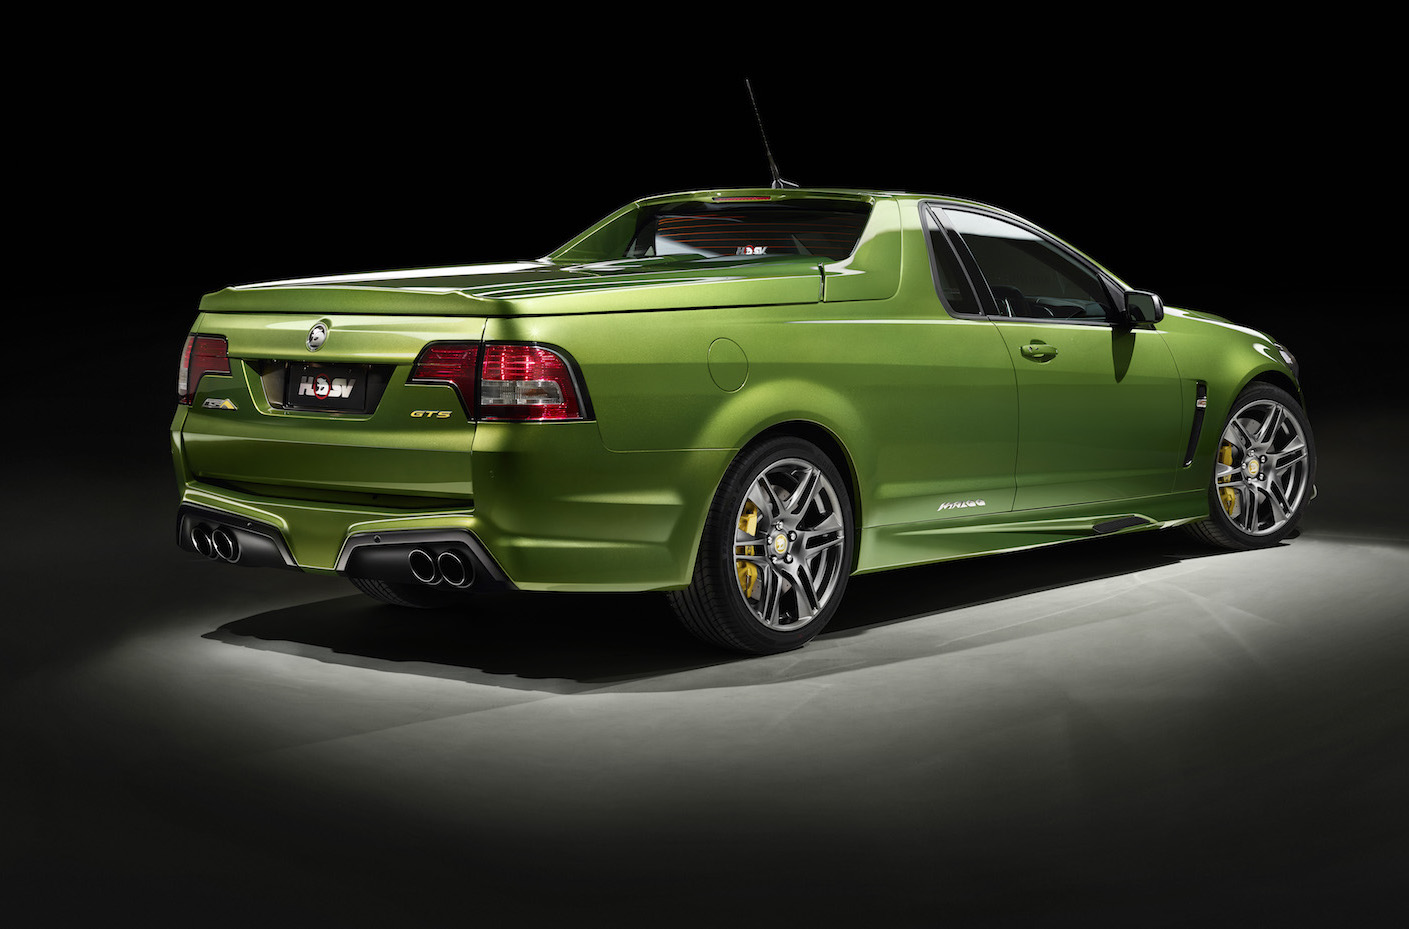 HSV ‘GTS-R Maloo’ to send off ute, LS9 power – rumour